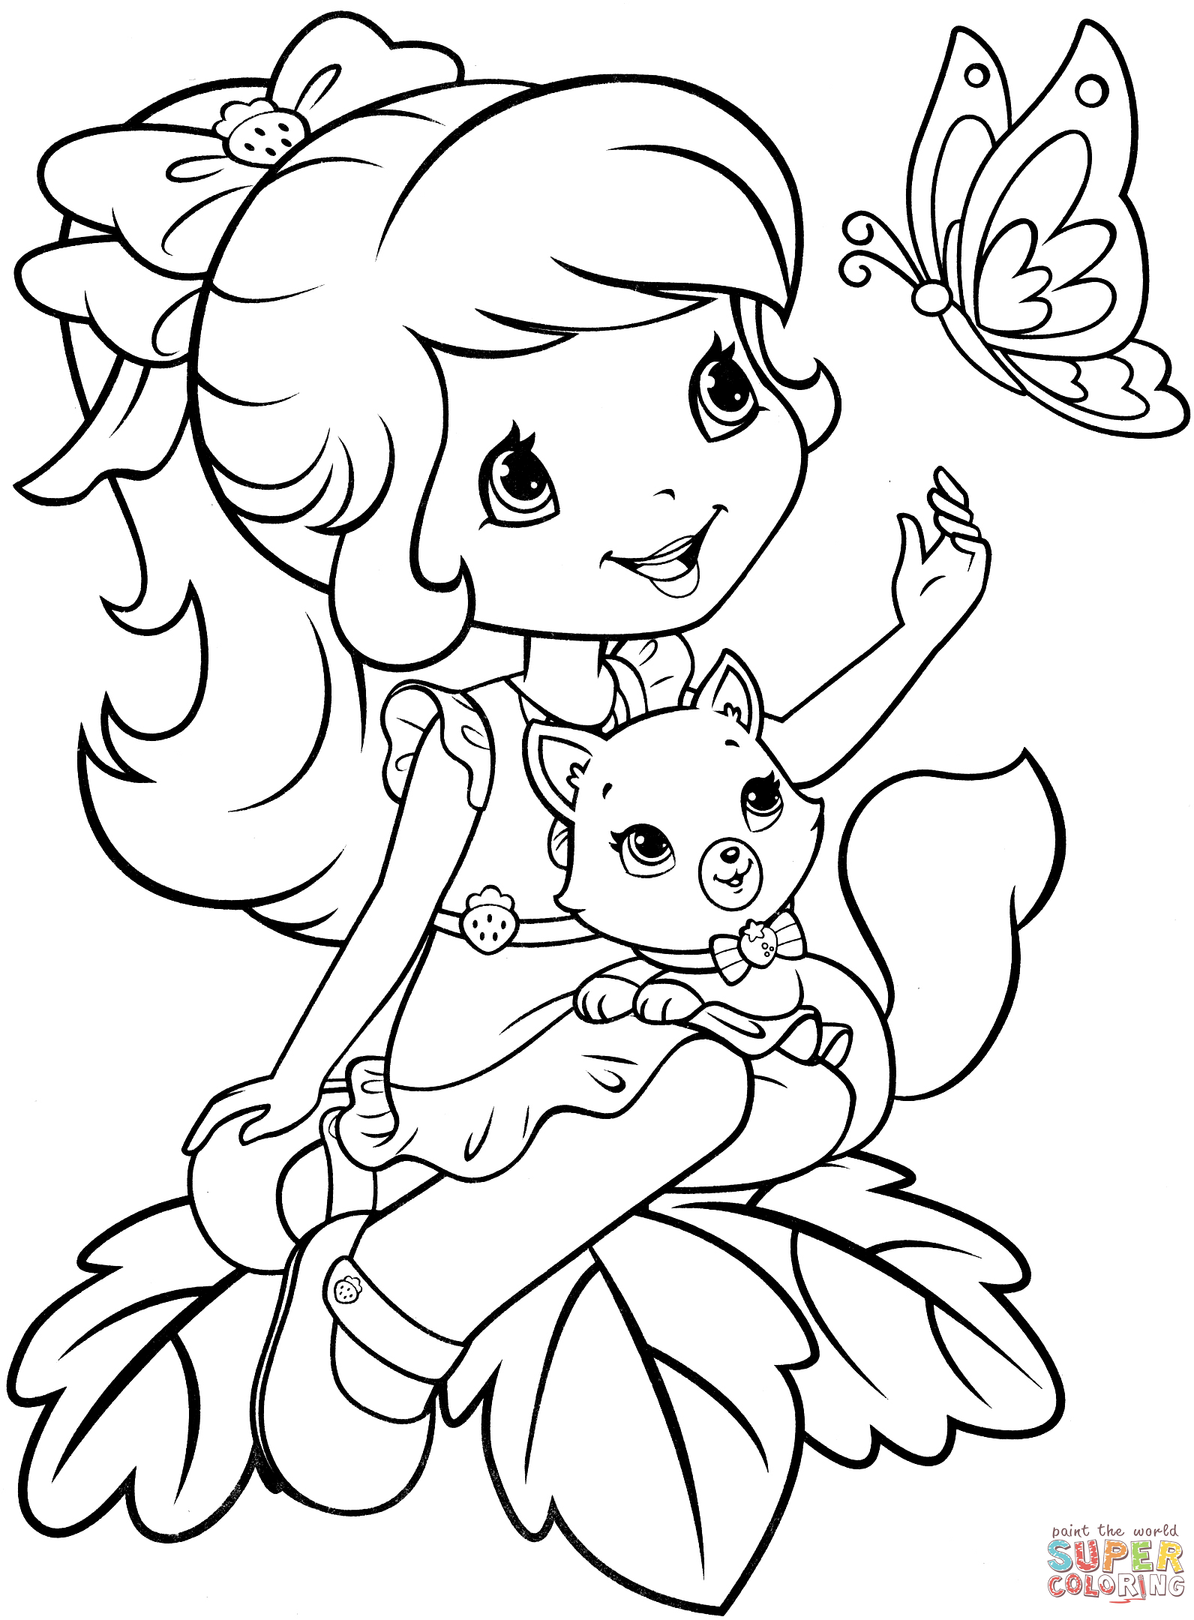 Strawberry Shortcake Cherry Jam Coloring Pages 3